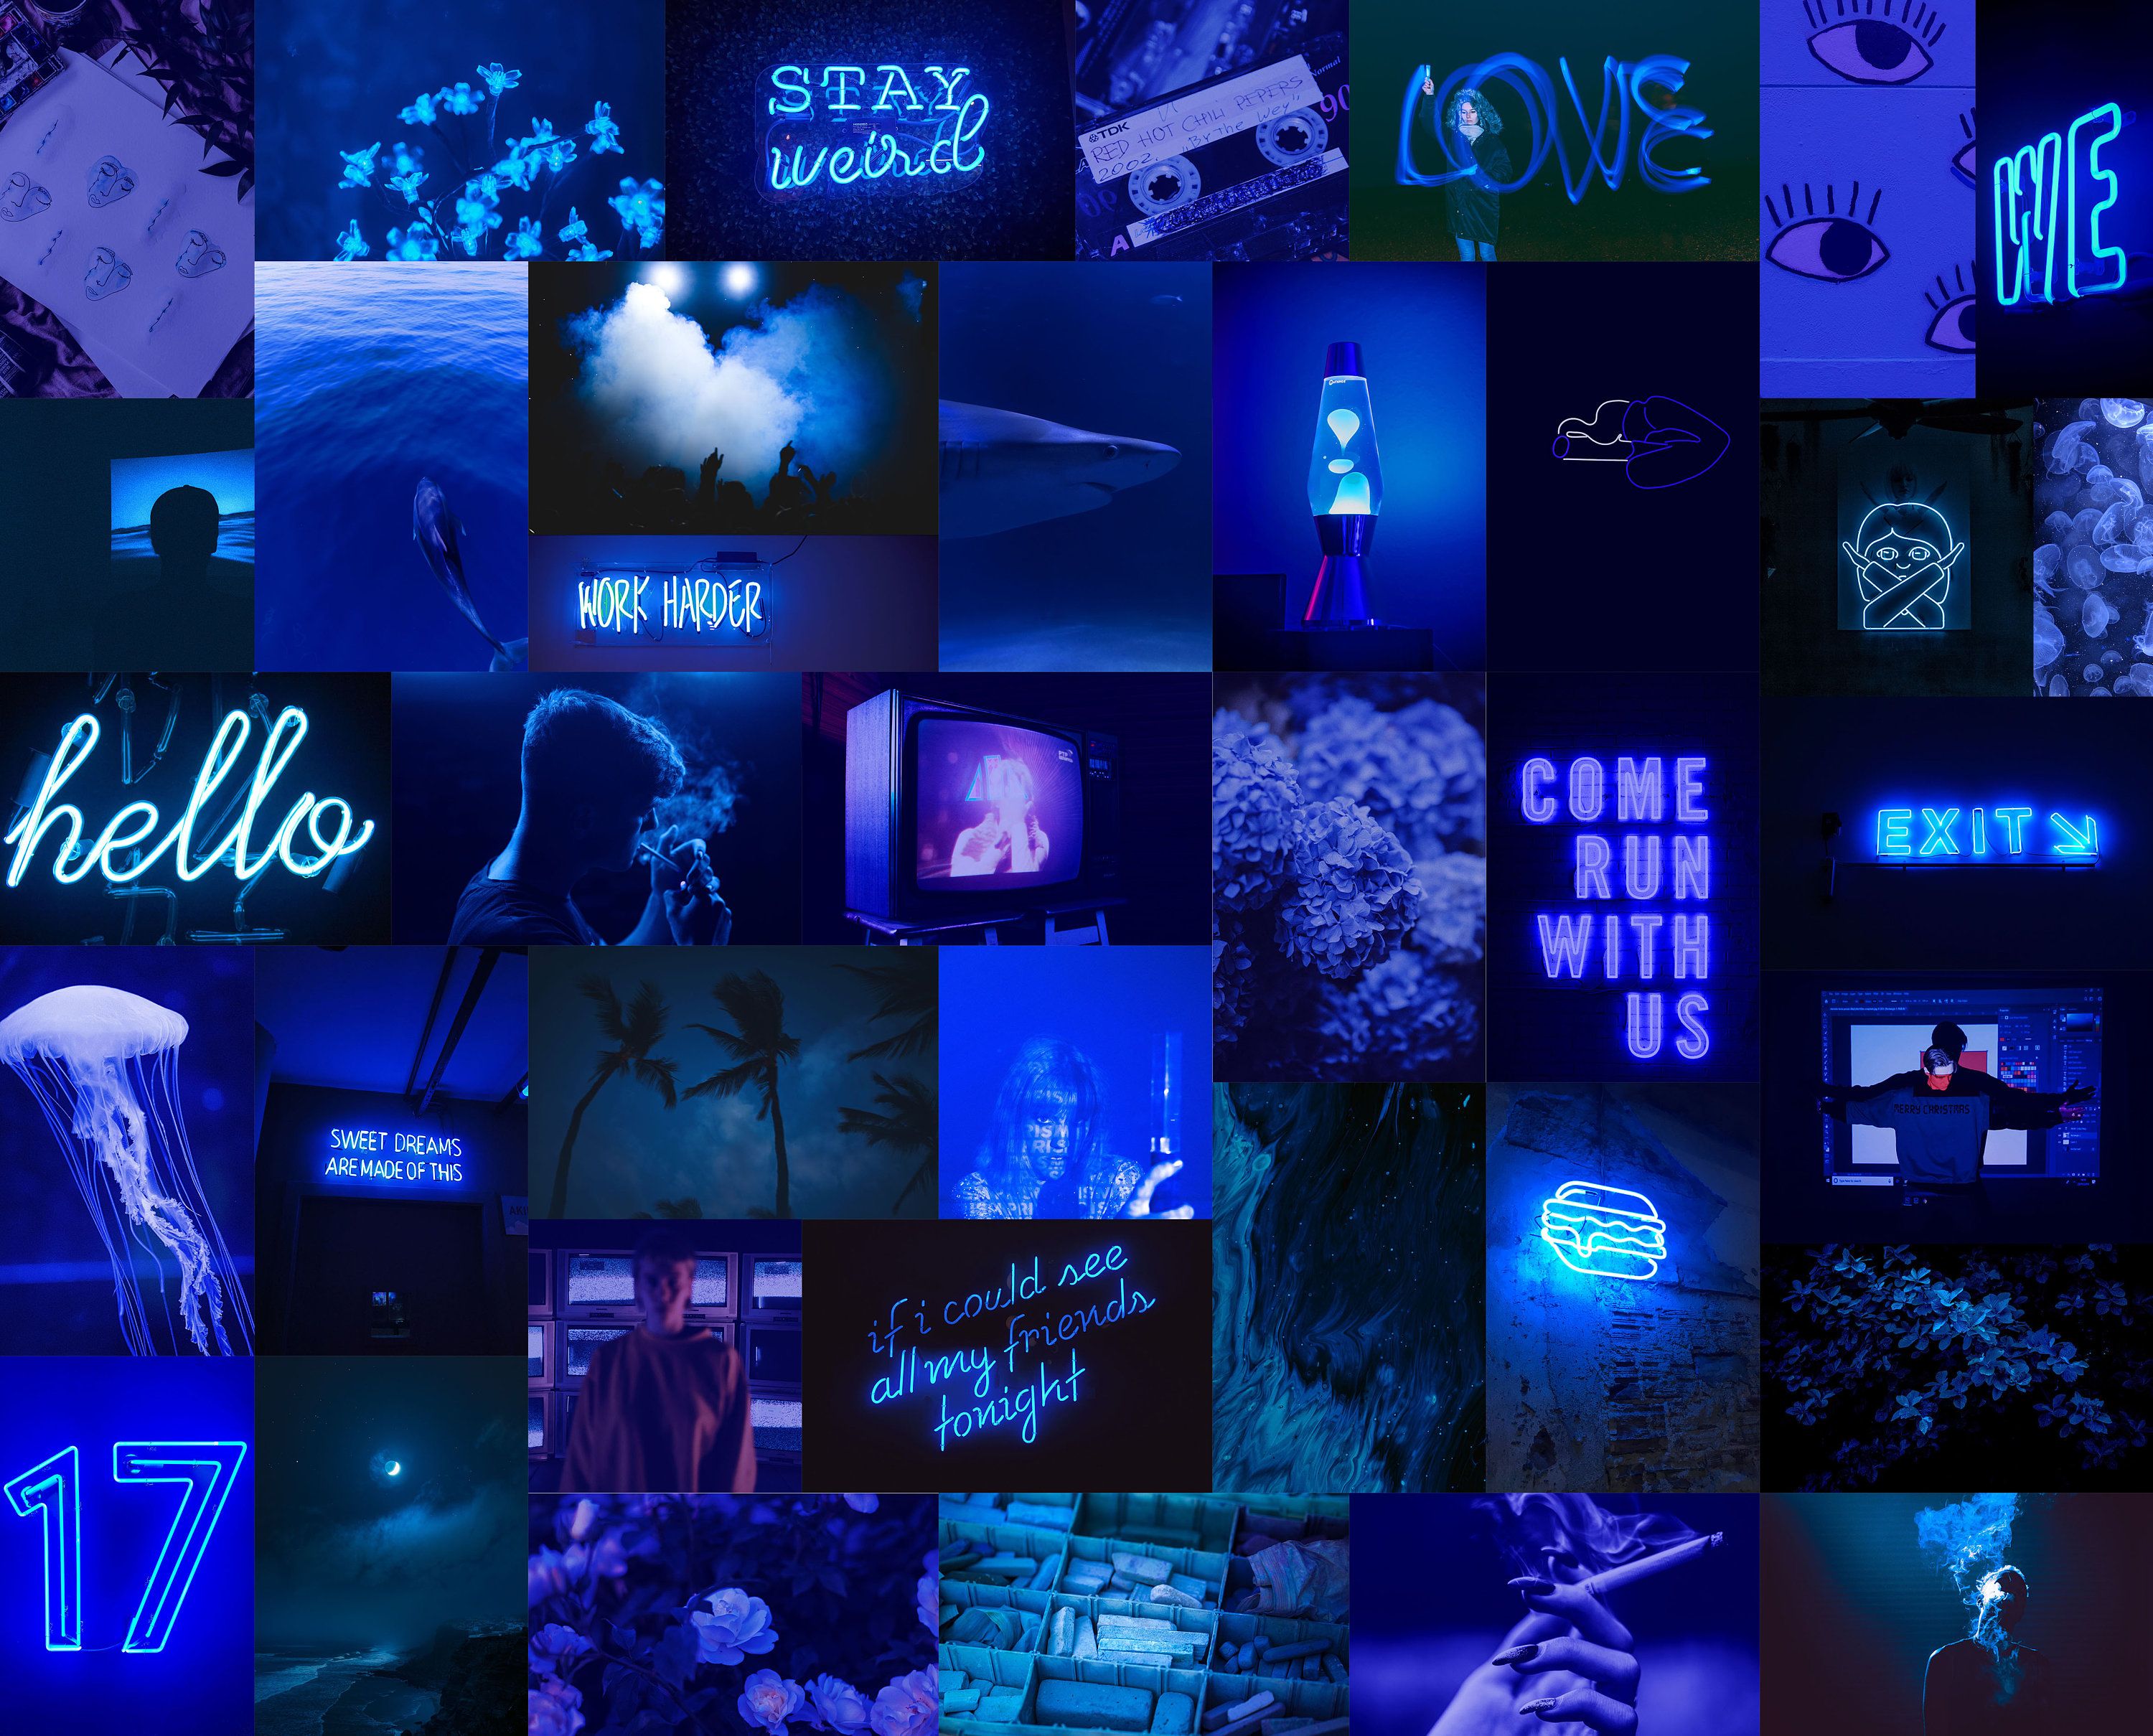 Bbbbb. Wall collage, Neon aesthetic, Photo collage